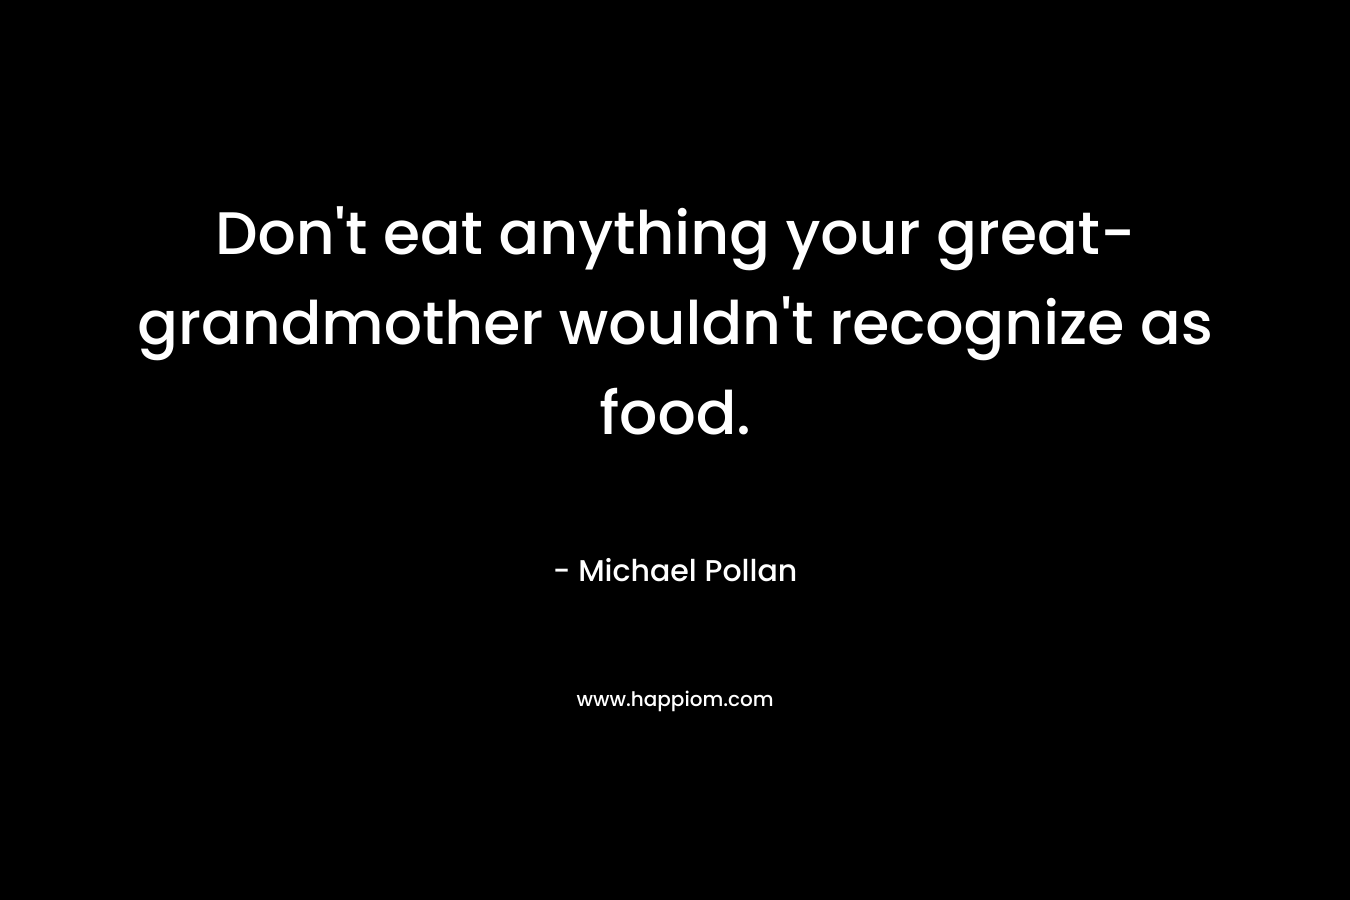 Don't eat anything your great-grandmother wouldn't recognize as food.